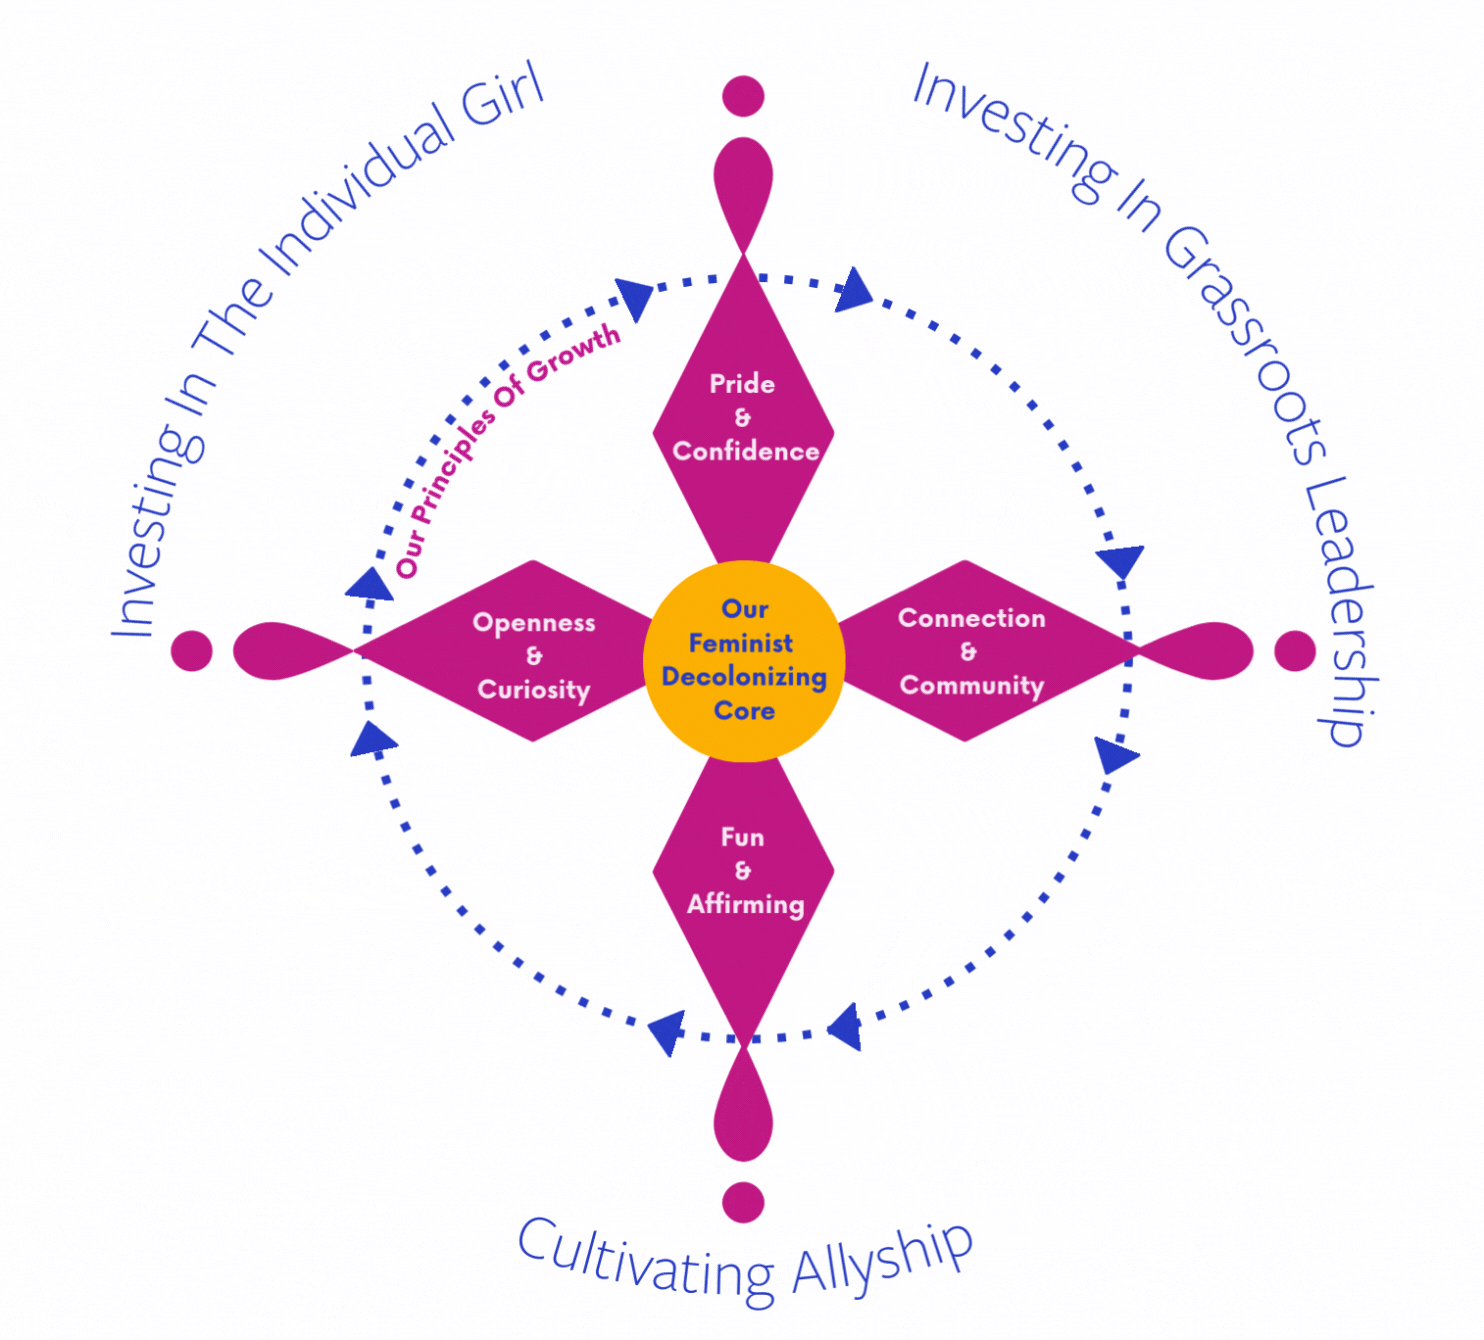 Image depicting Shadhika's Theory of Change. There is a yellow circle in the middle with the words 'our feminist, decolonizing core'. The yellow circle is surrounded by magenta petals each indicating one of Shadhika's four principles of growth. They are, 'pride and confidence', 'connection and community', 'fun and affirming', and 'openness and curiosity'. A blue dotted line connects all the four magenta petals to indicate that they are interconnected. A larger blue circle encompasses the whole image showing Shadhika's three areas of focus. They are, 'Investing in the individual girl', ' investing in grassroots leadership', and 'cultivating allyship'.